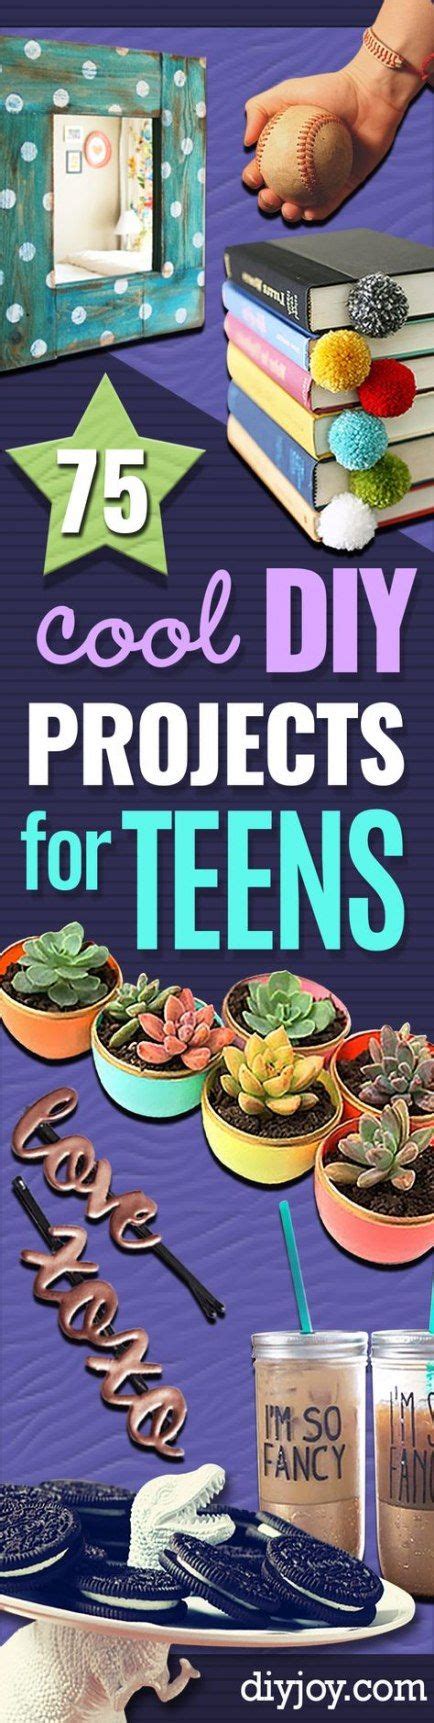 36 Trendy Diy Crafts For Teenagers Projects Bedroom Ideas Cool Diy